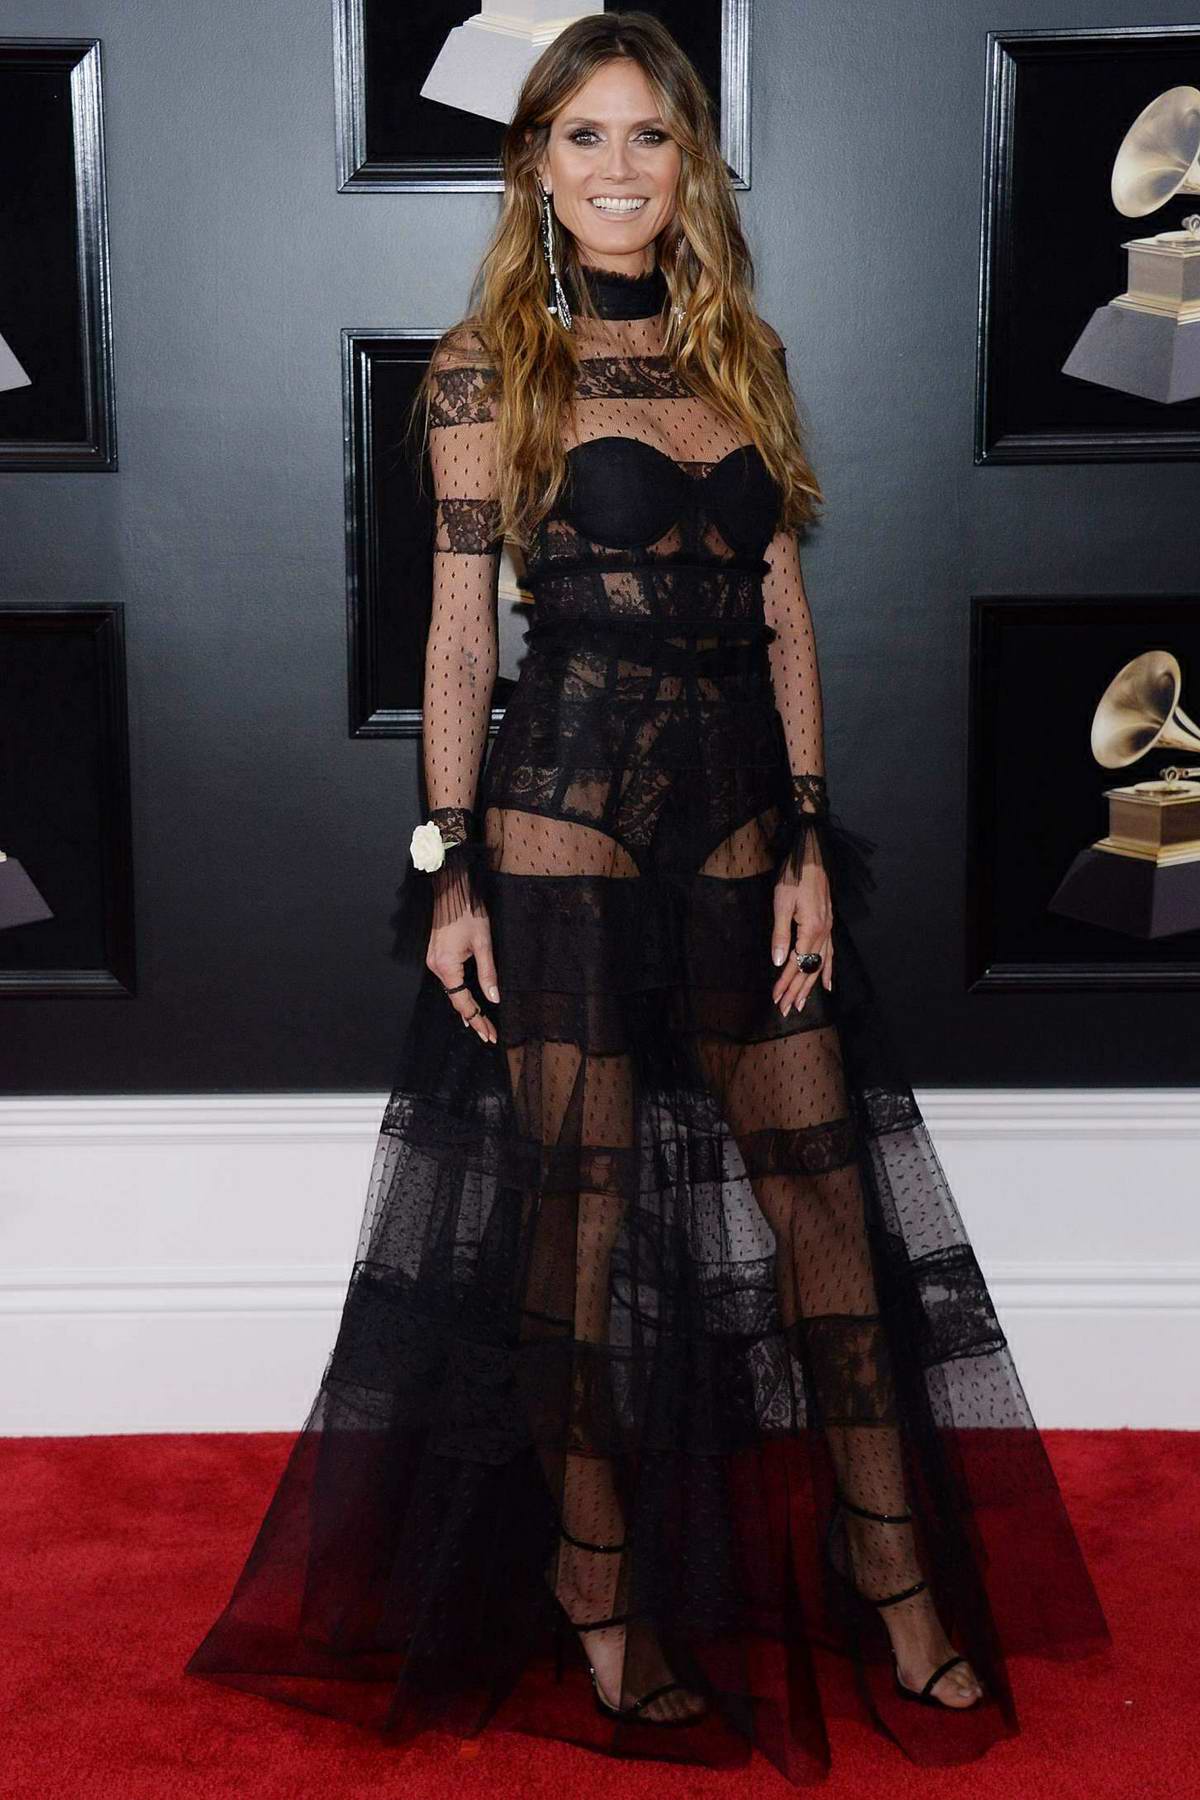 Heidi Klum attends the 60th Annual Grammy Awards at Madison Square